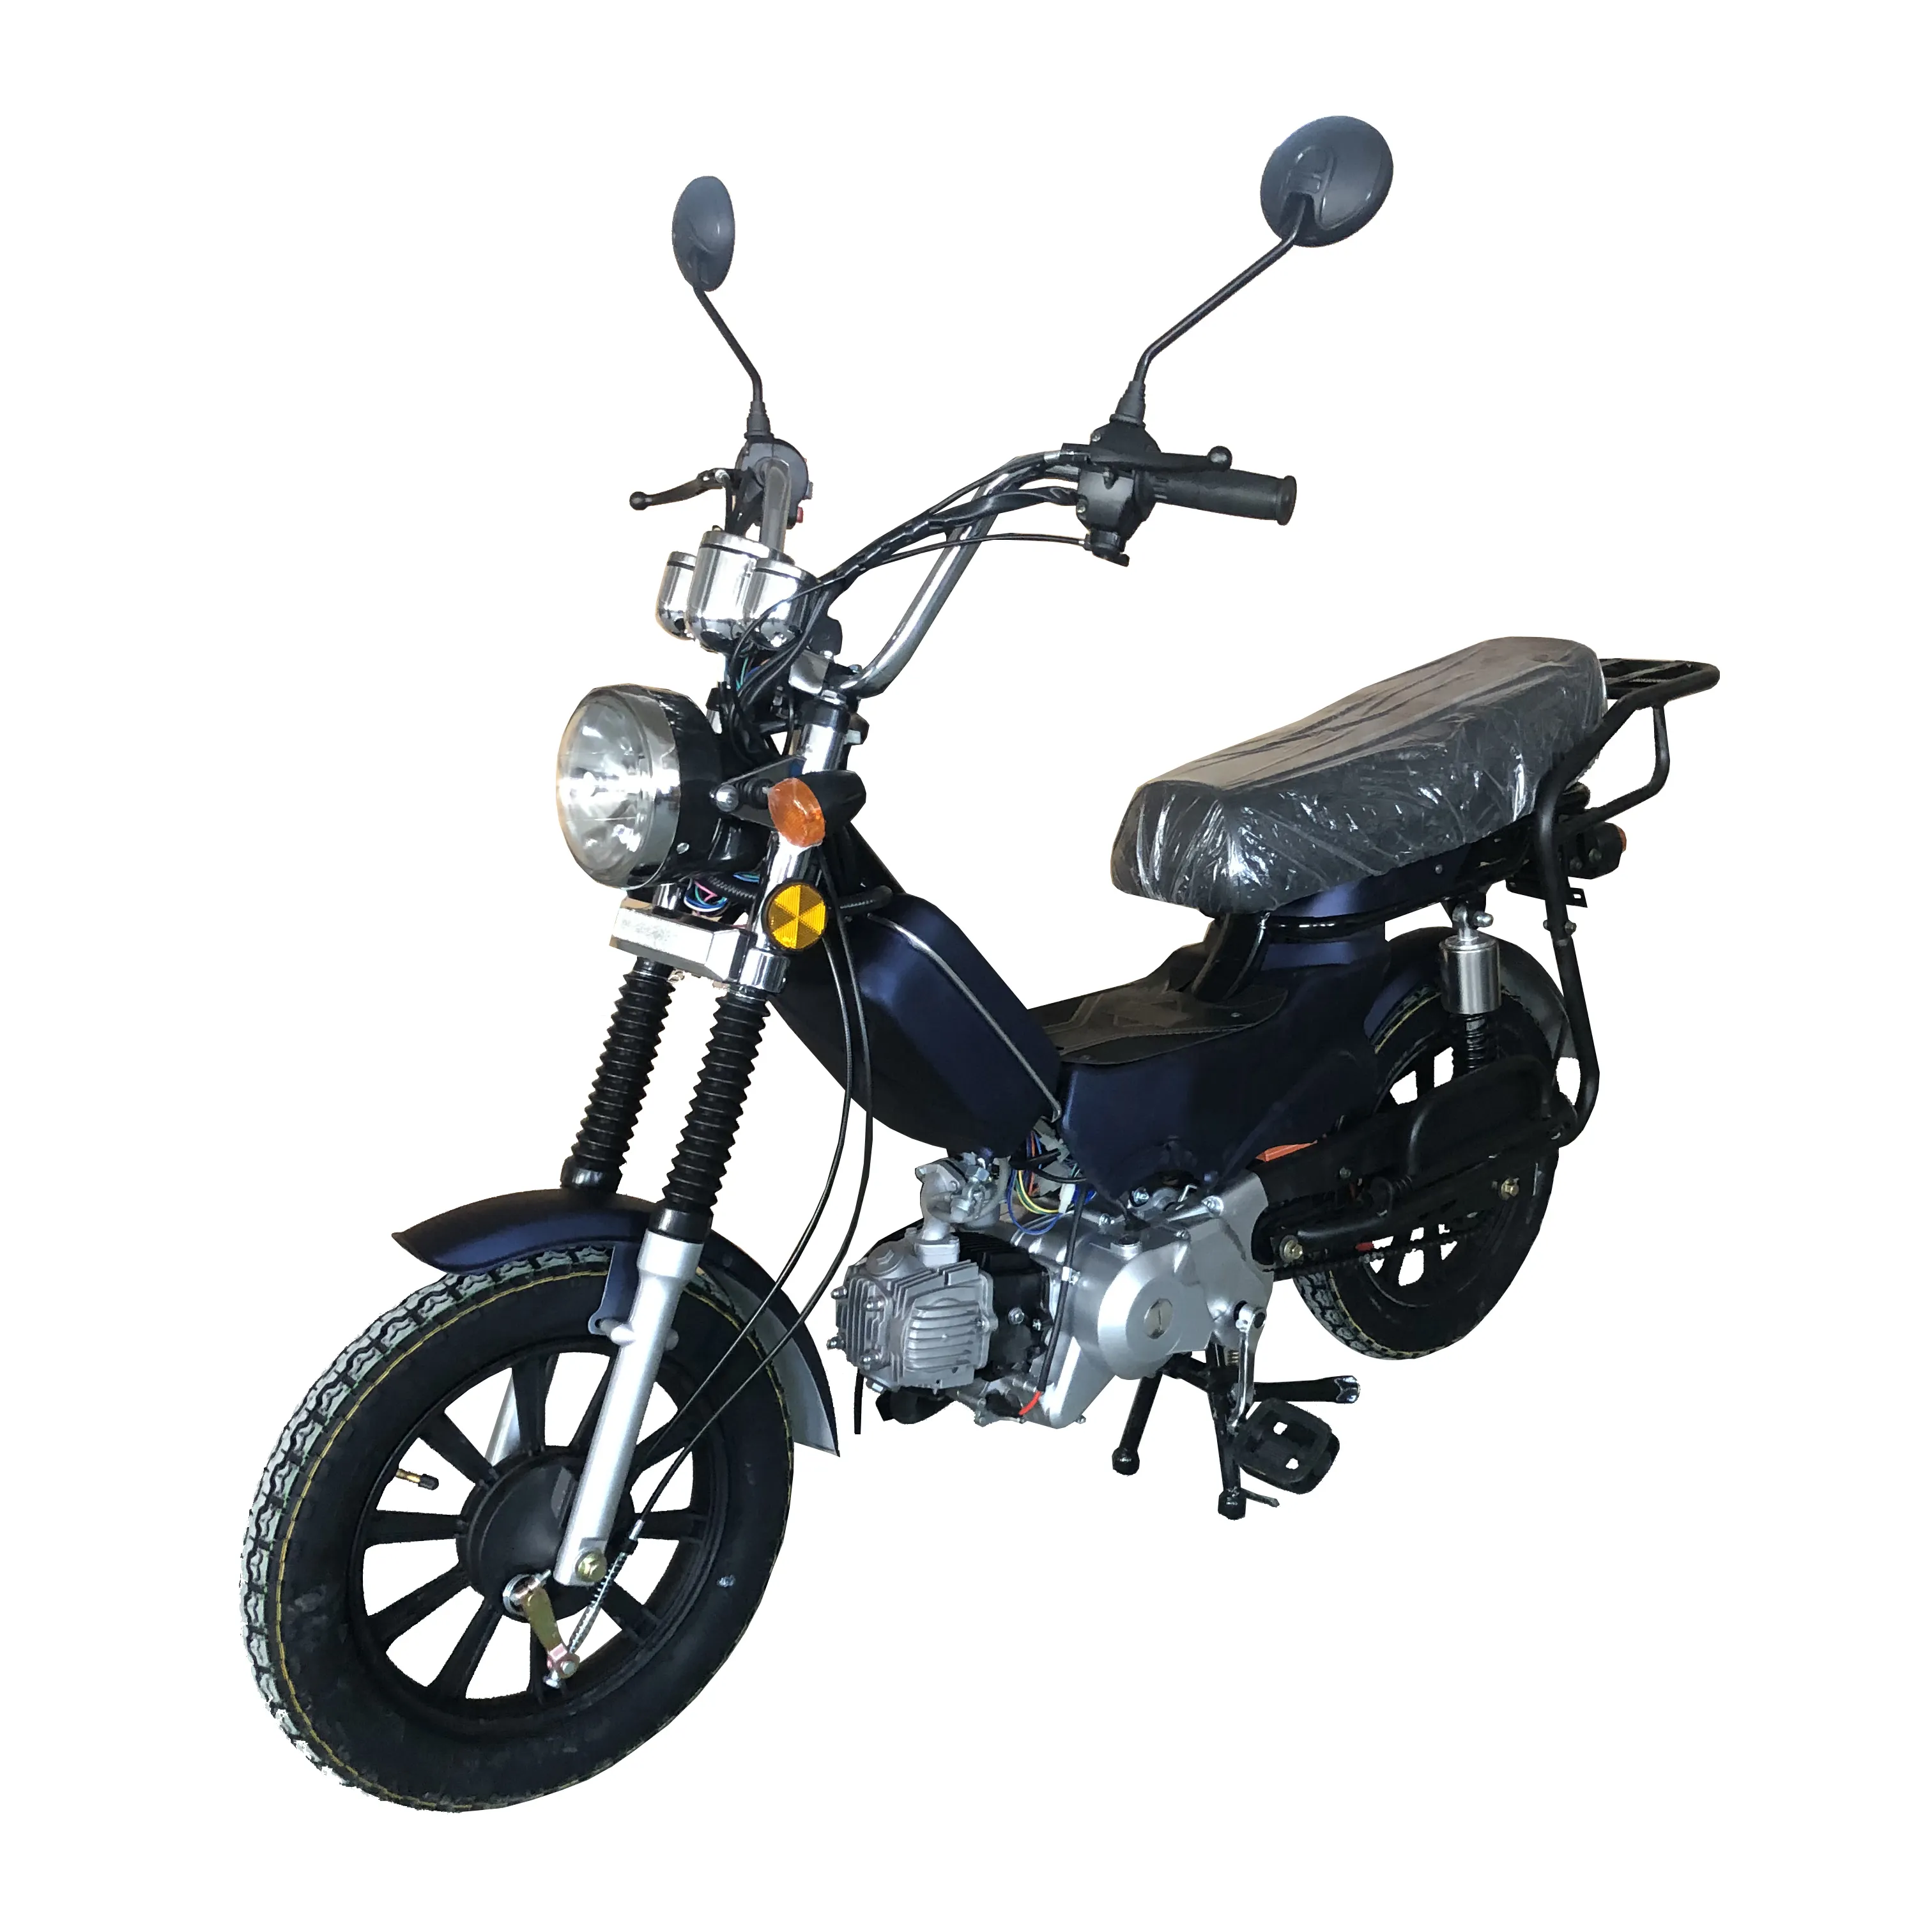 Off Road On Road Motorcycle 4 Stroke 49CC Bike Mini with pedal for adults for south American